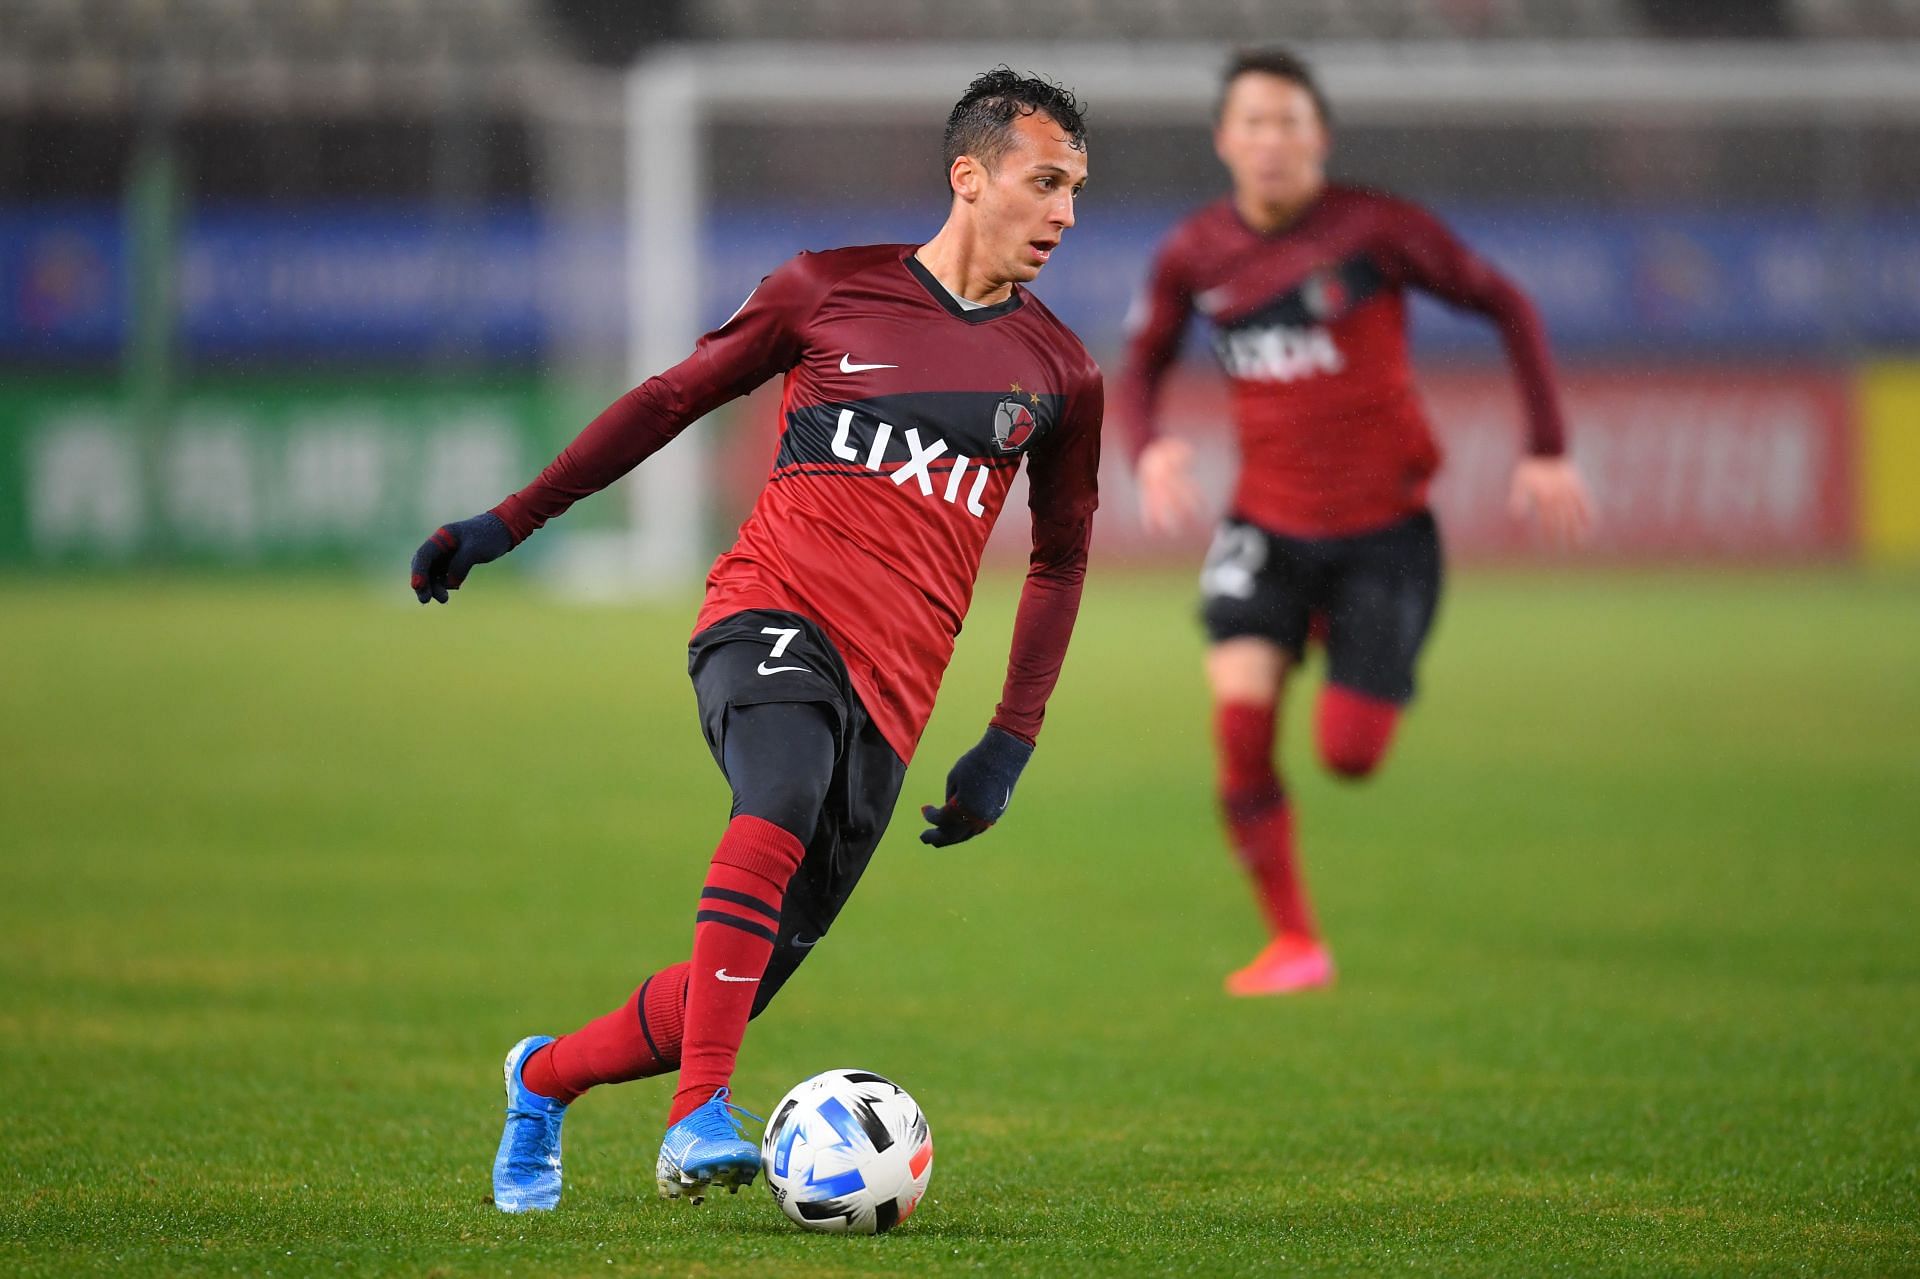 Kashima Antlers take on Consadole Sapporo this weekend